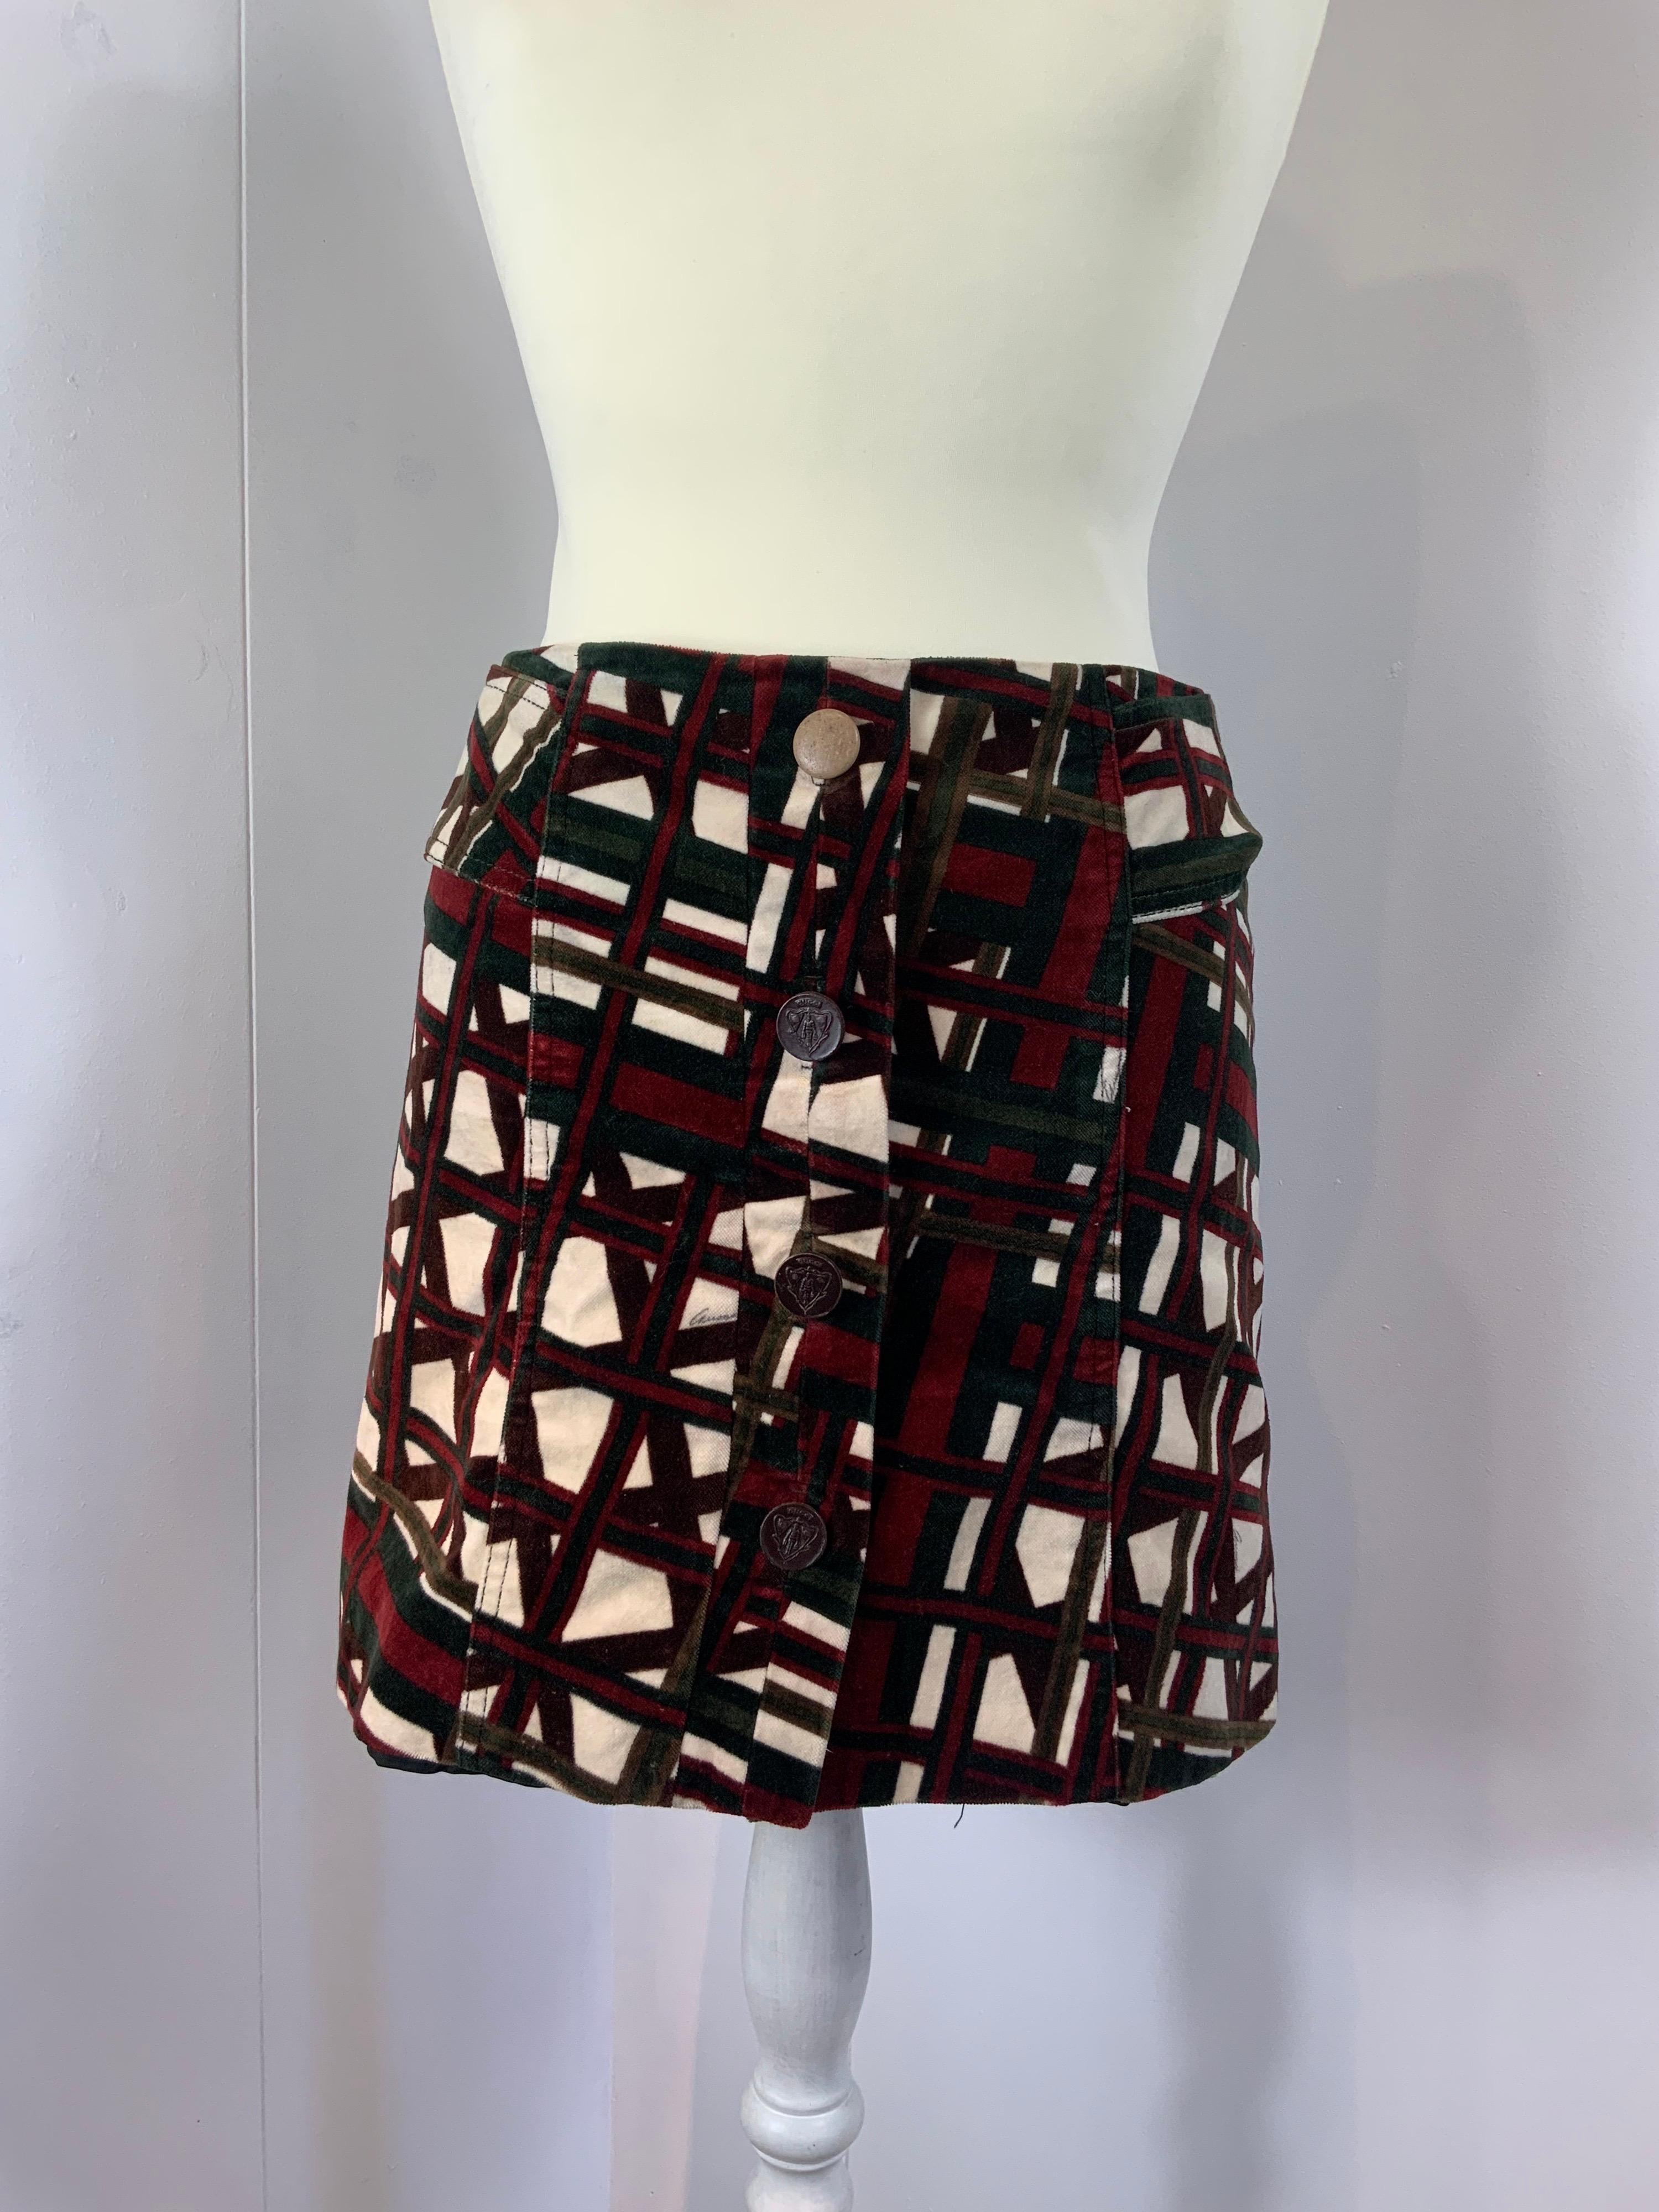 Gucci Skirt. Designed by Frida Giannini in 2006.
Made in cotton and nylon. Fabric feels like velvet.
Fully lined in viscose and polyester.
Posterior zip closure.
As you can see in photos the first frontal bottom was lost and been replaced.
Size 40